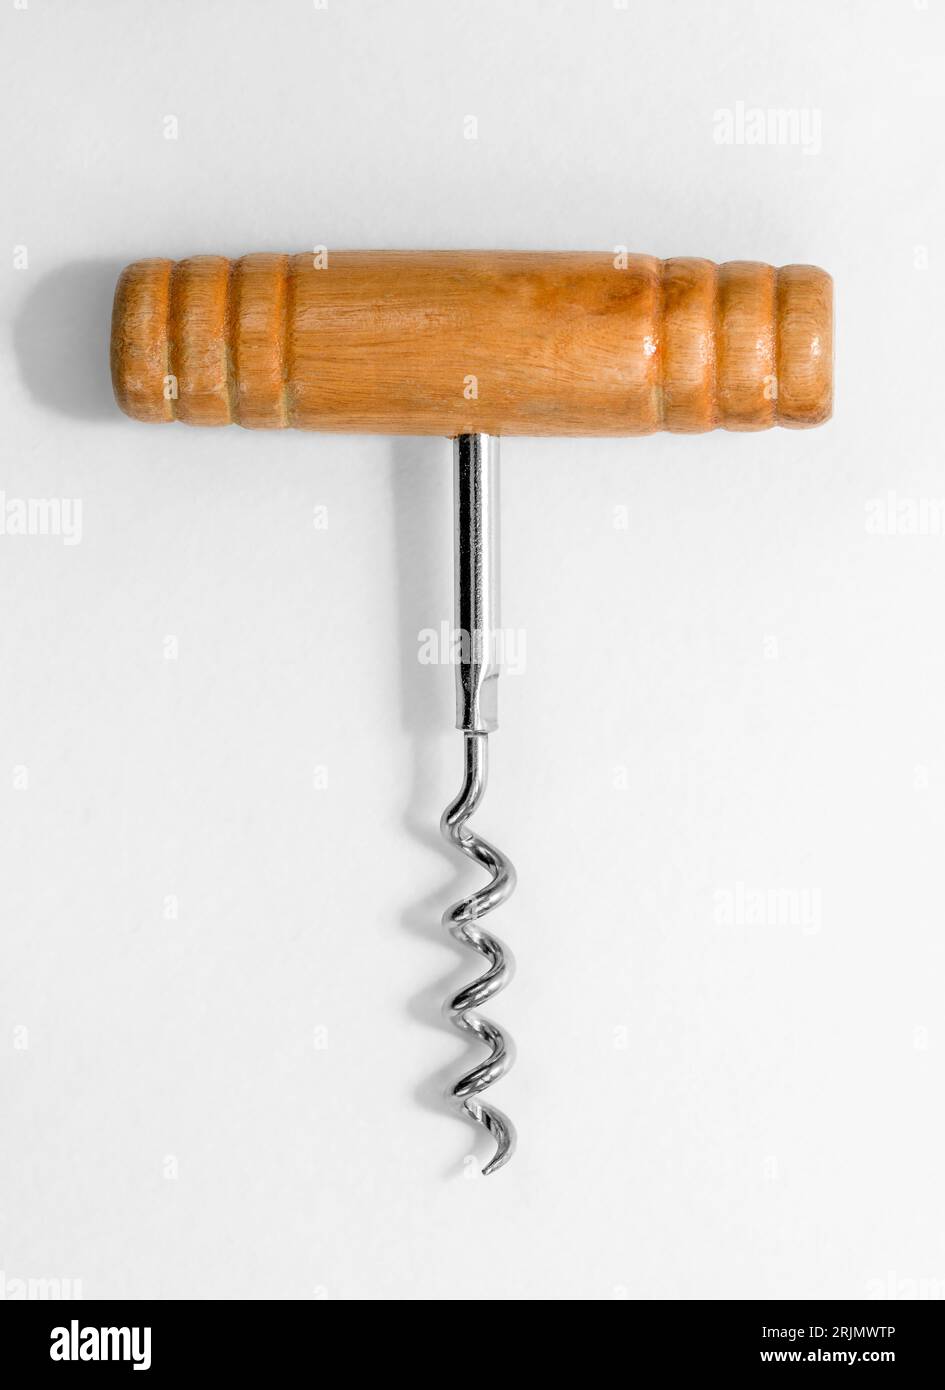 Wine corkscrew with wooden handle on white background. Stock Photo